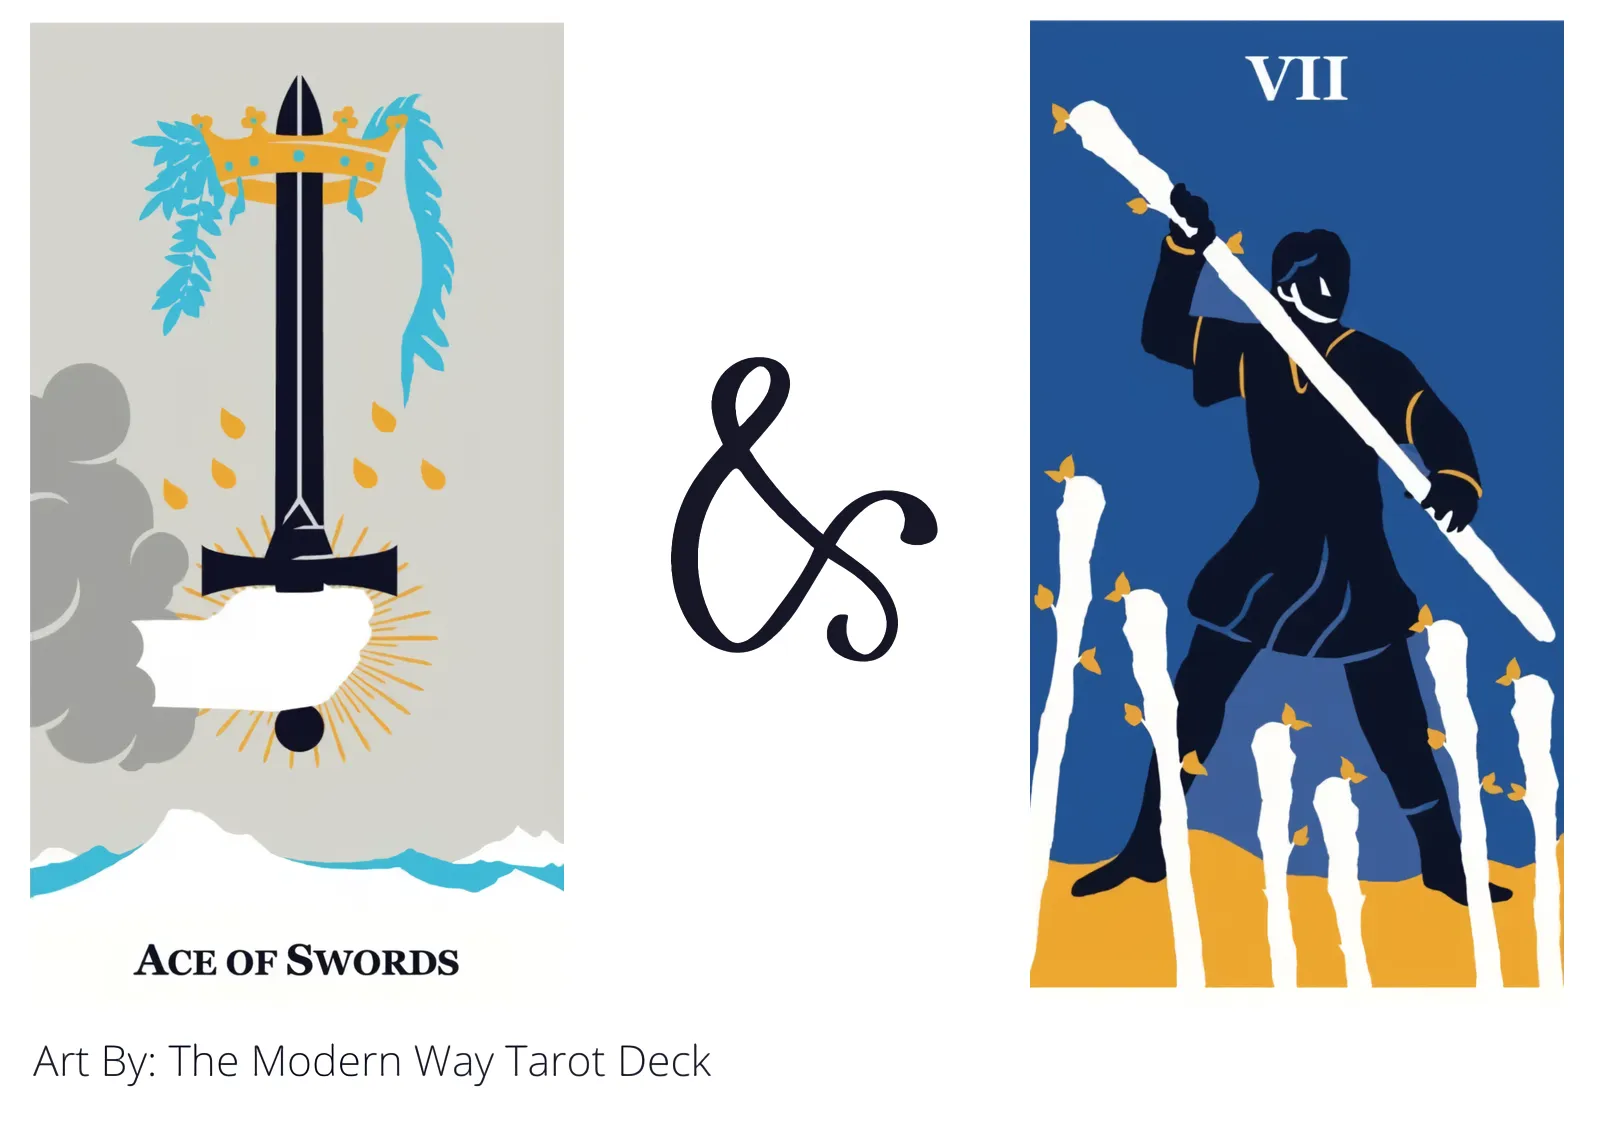 ace of swords and seven of wands tarot cards together